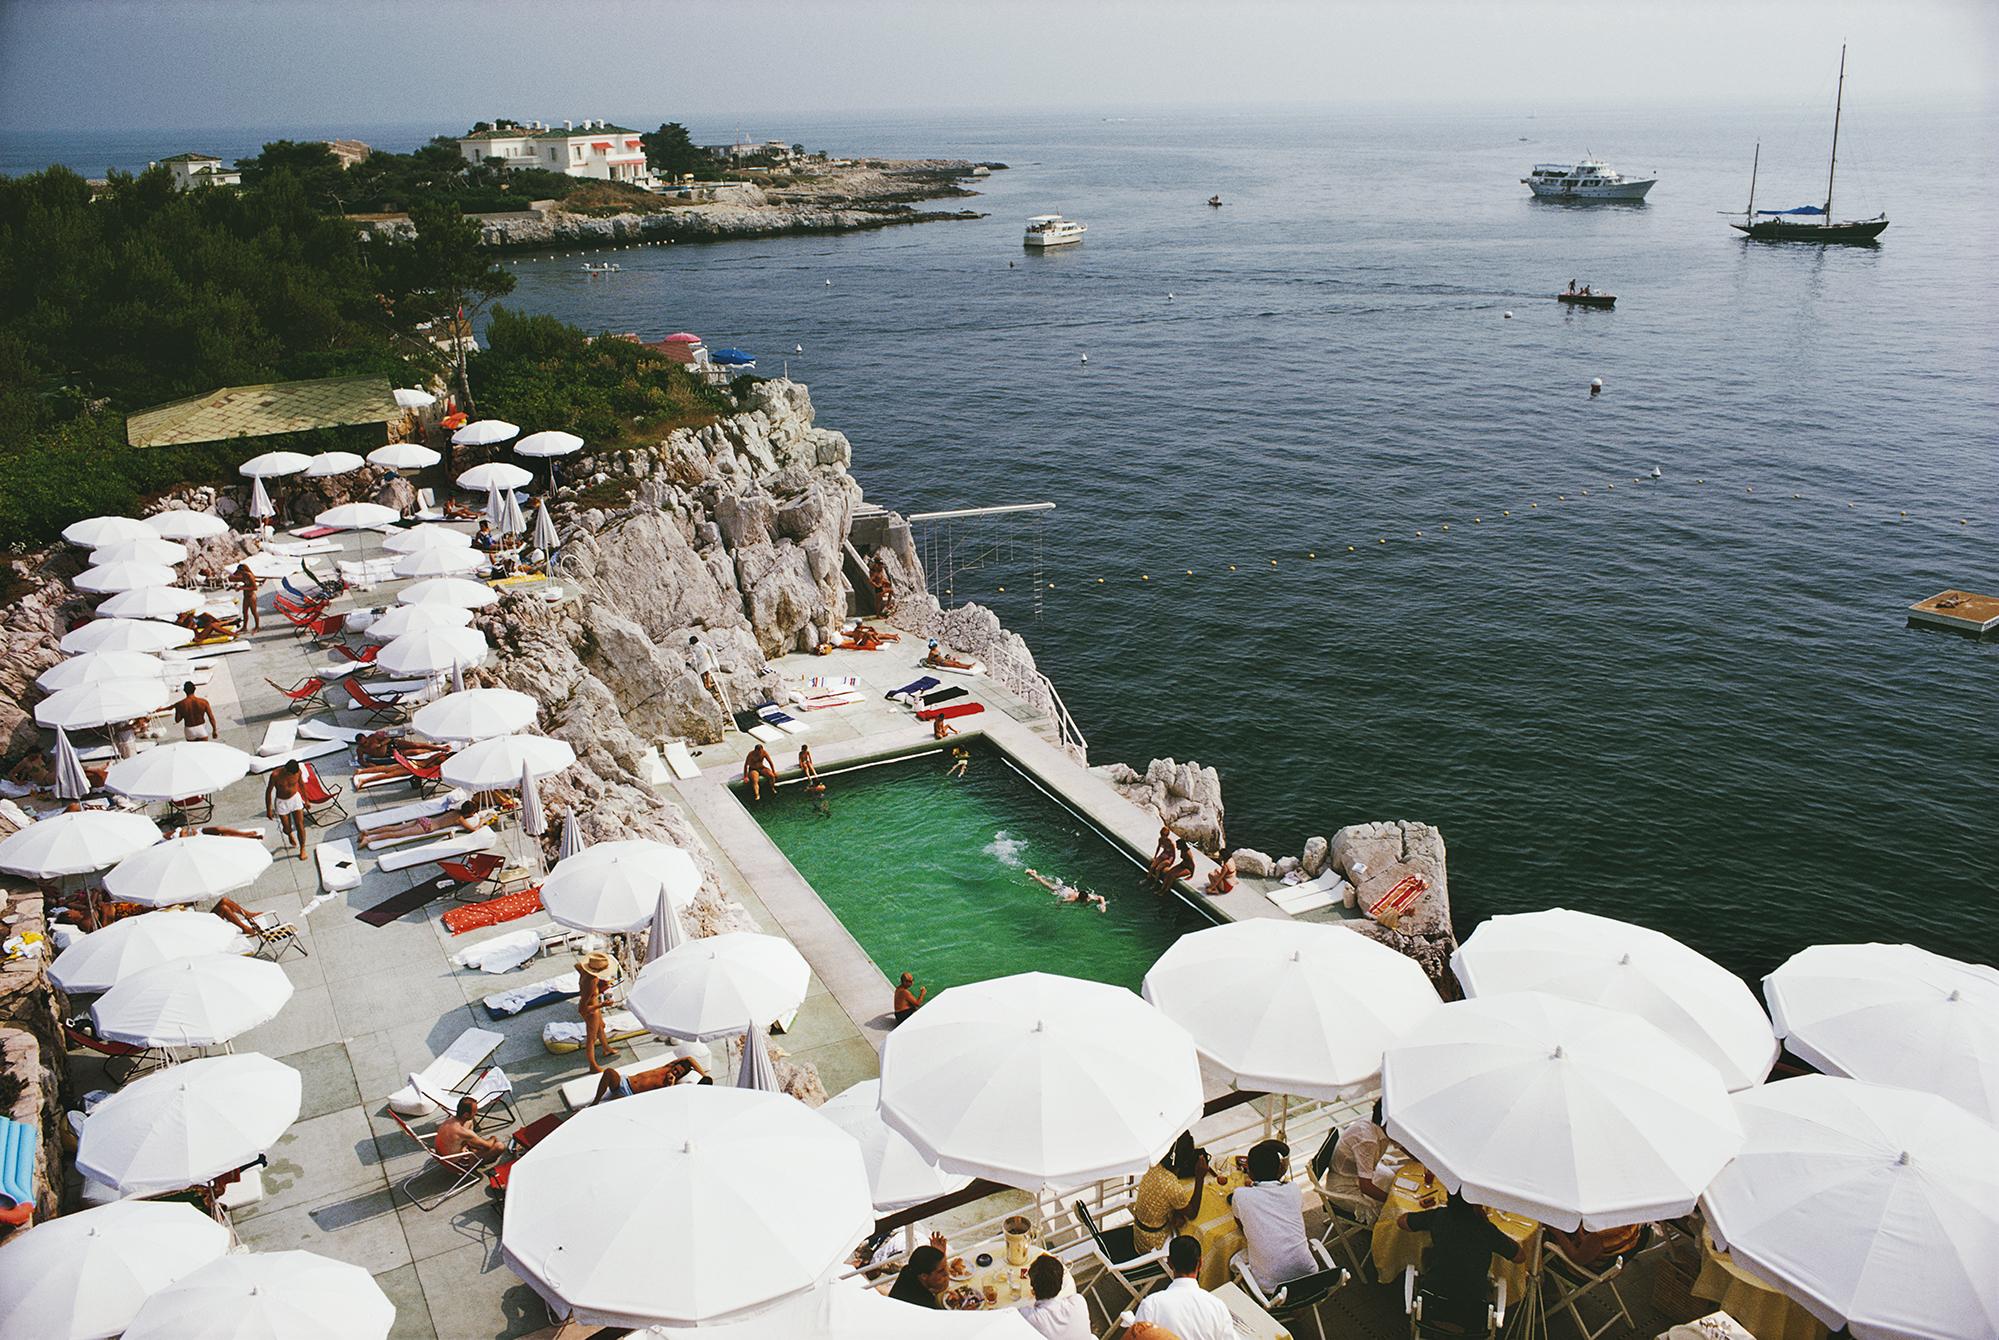 Slim Aarons Landscape Photograph - Pool by the Sea, Estate Edition